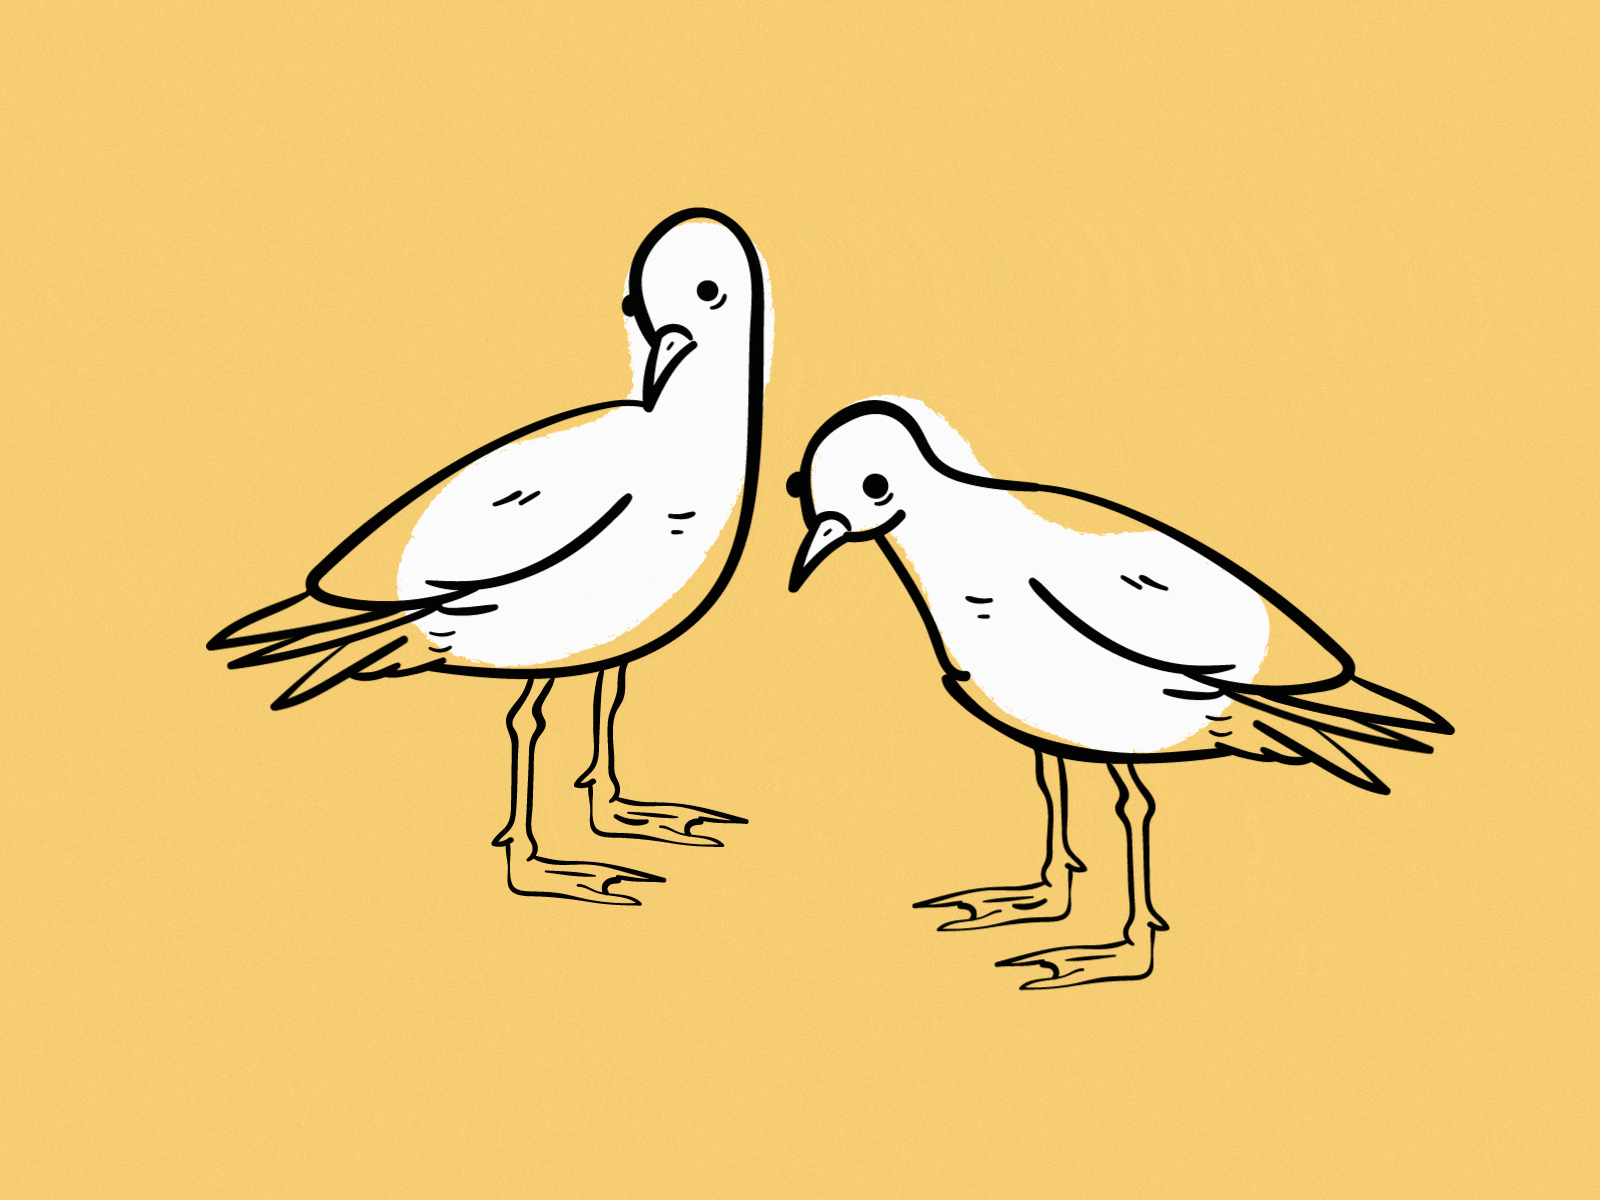 Contemplations of pigeons animation doodle illustration